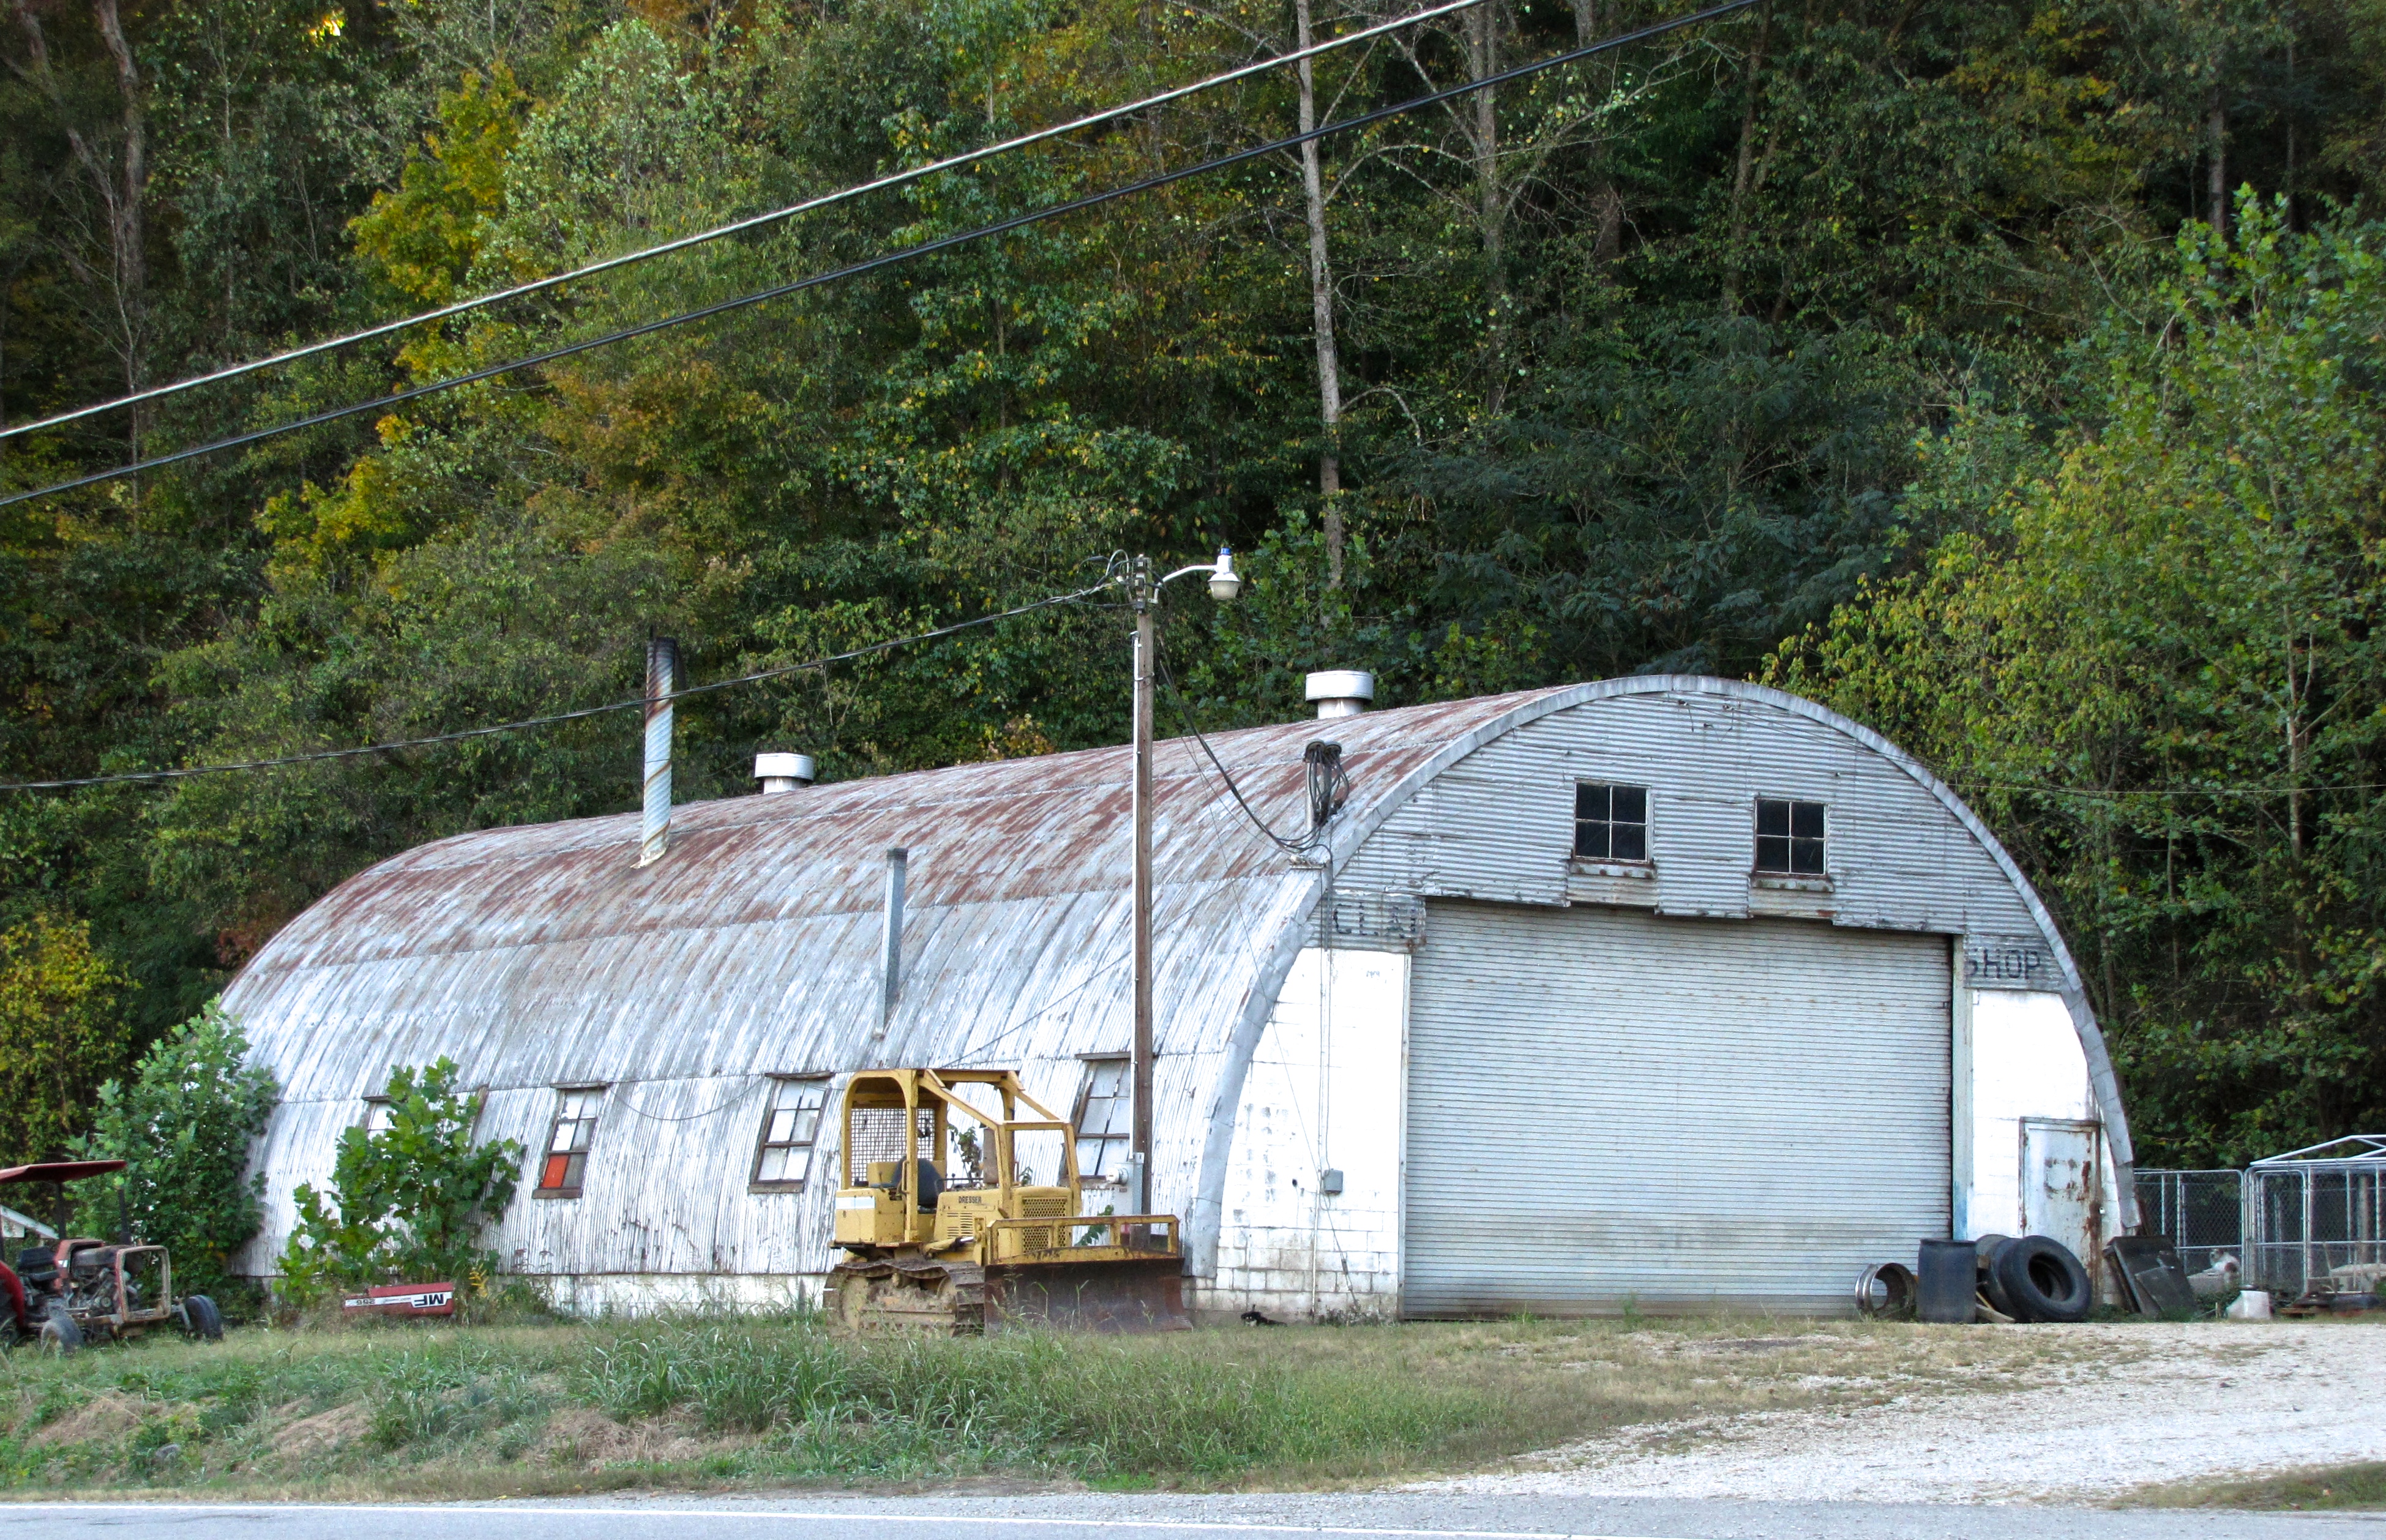 quonset hut in About Us, ID